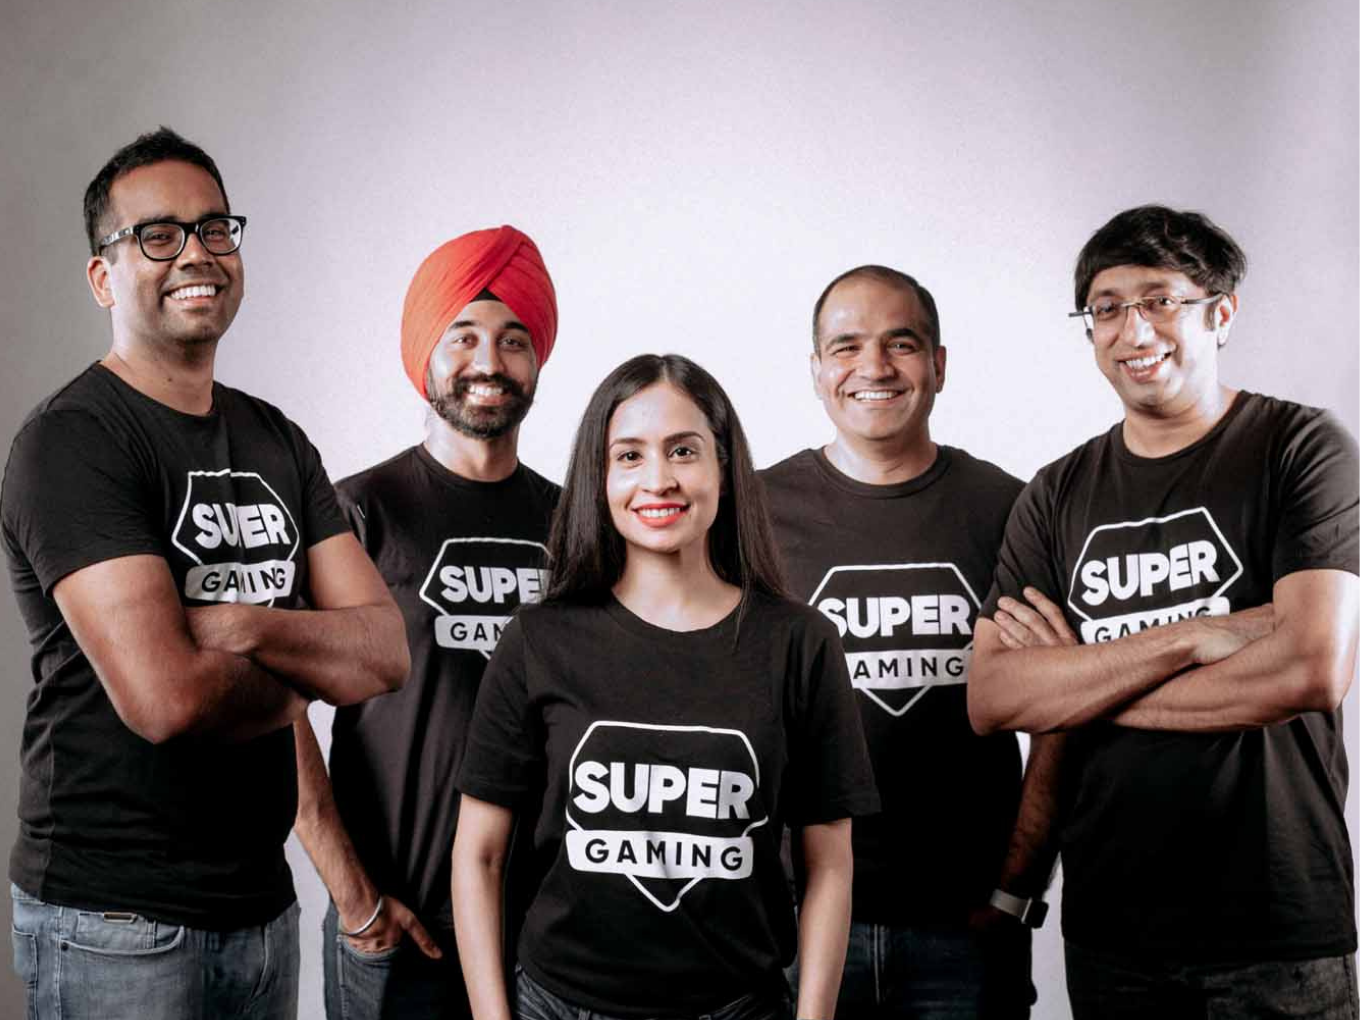 With Local Content, Real-Time Multiplayer Games, SuperGaming Plans To Carve A Niche In $7 Bn Indian Gaming Market